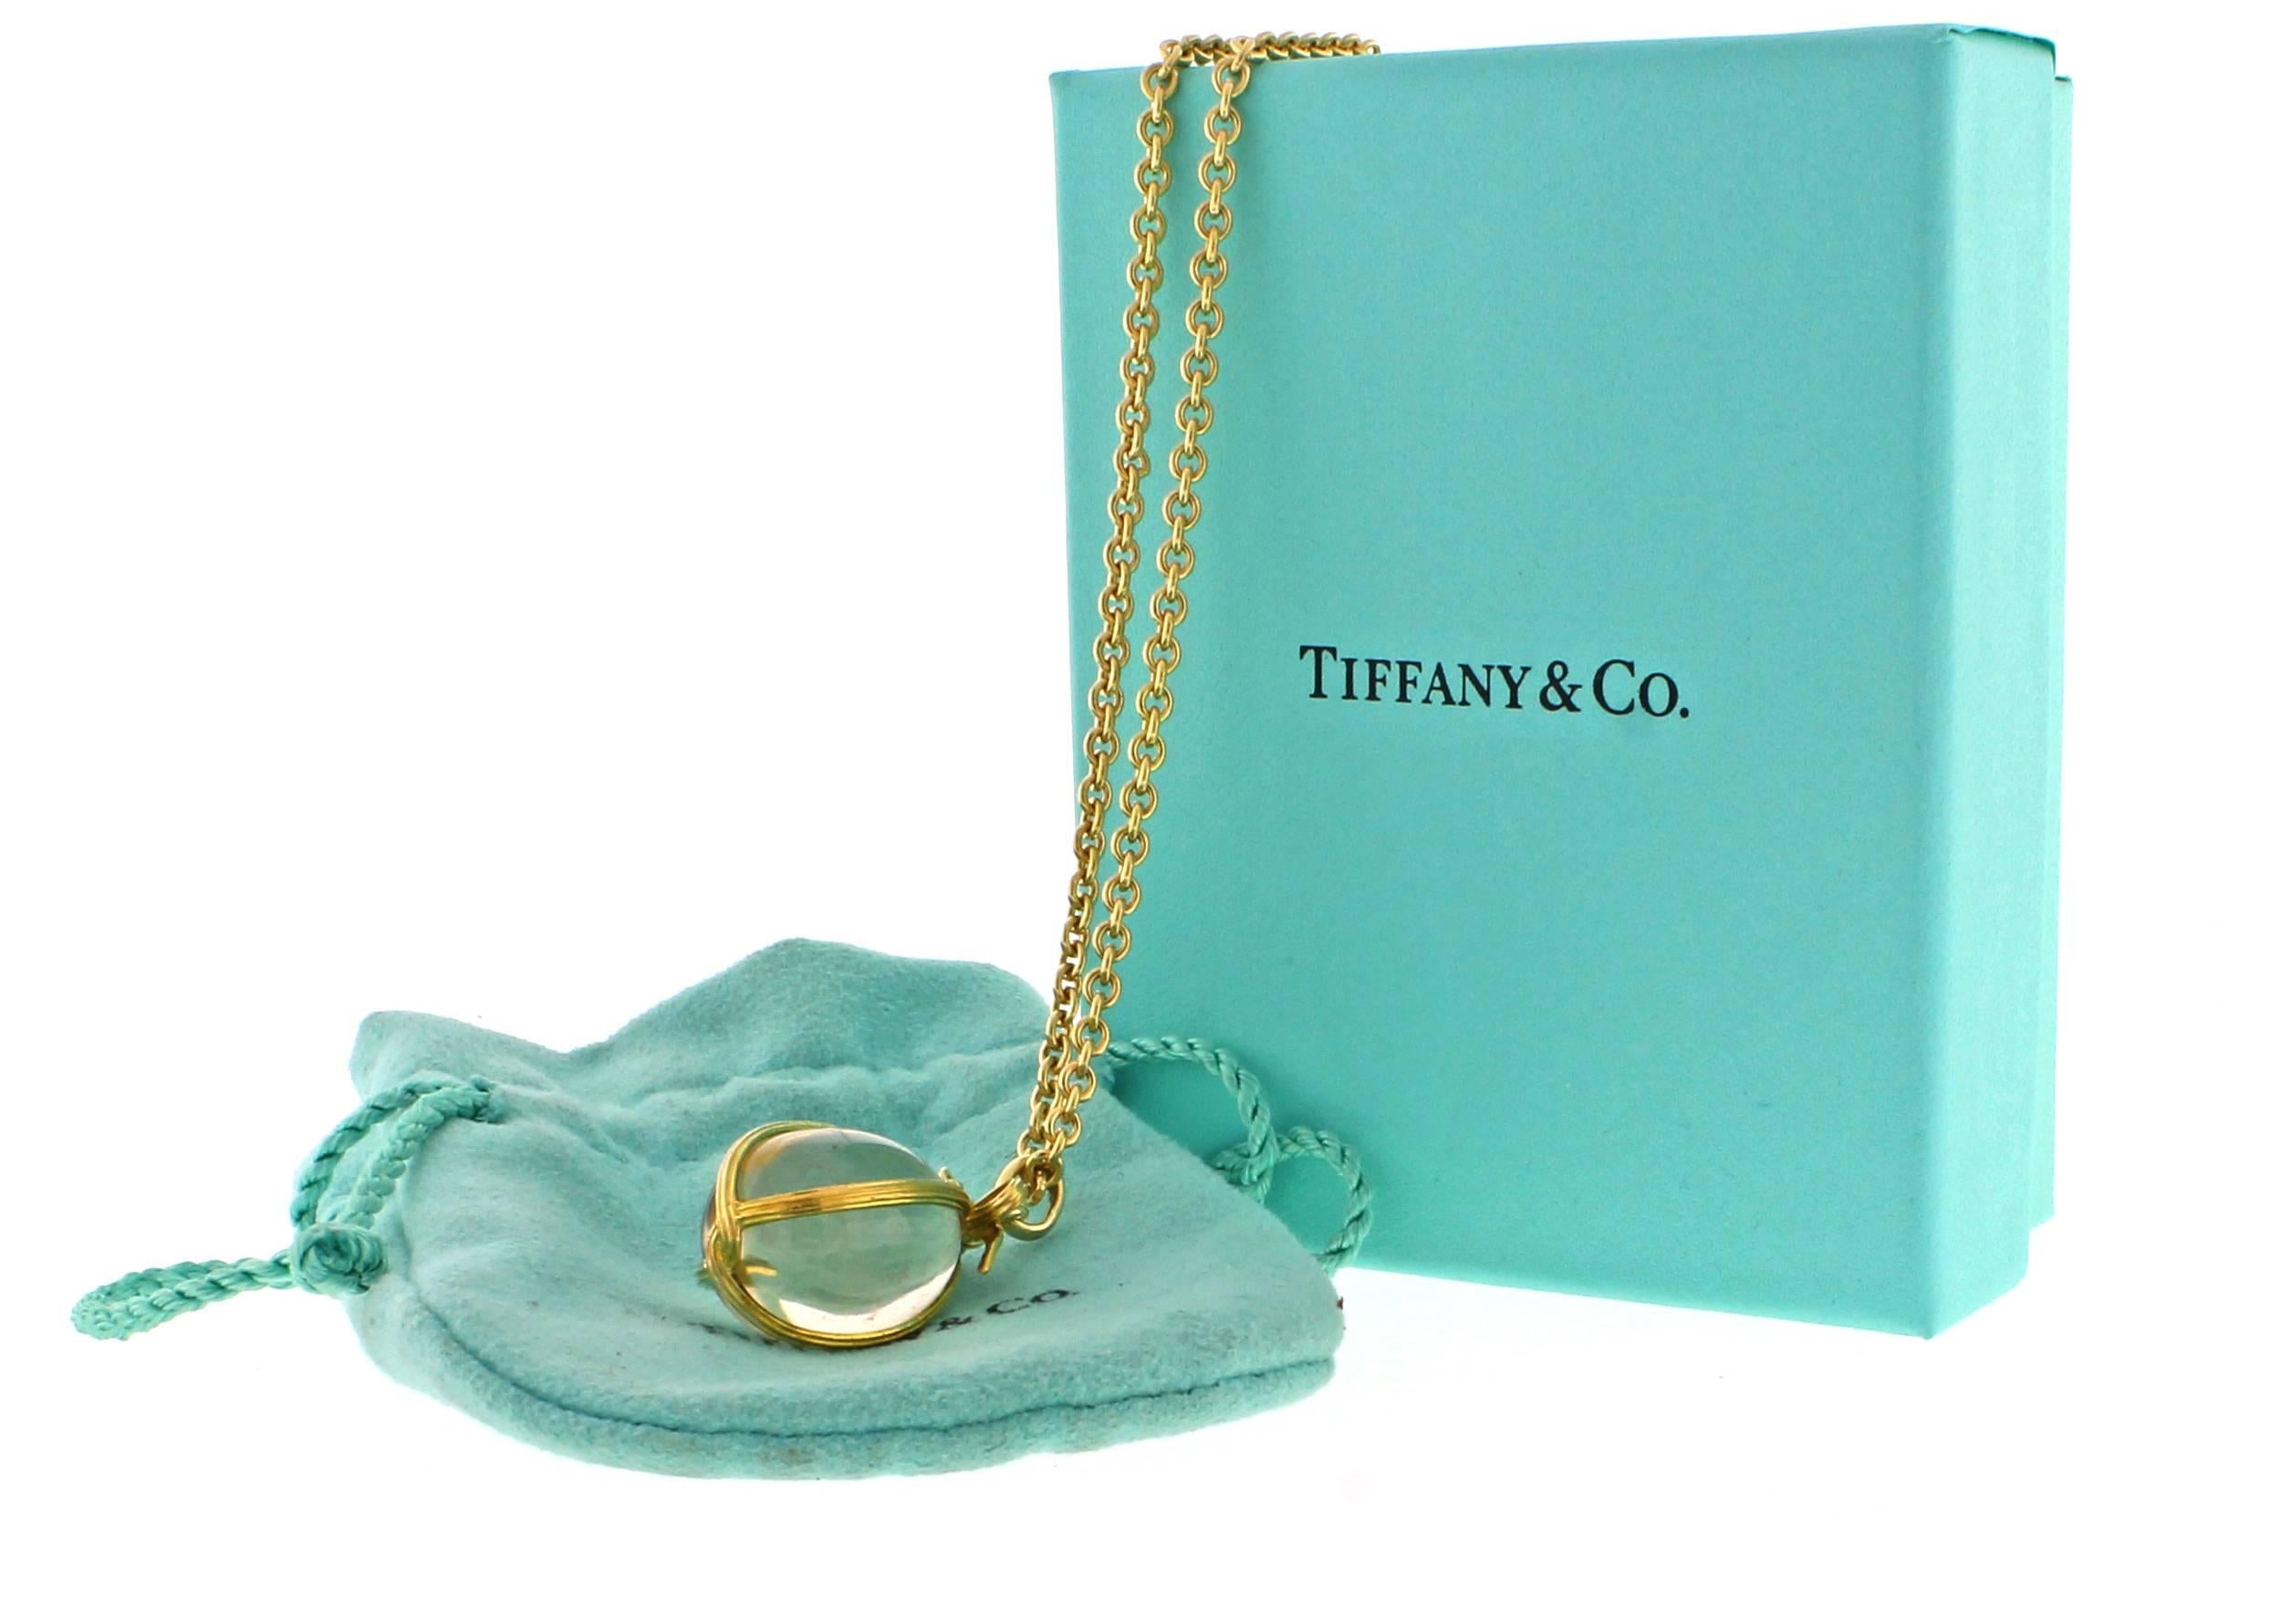 From Jean Schlumberger, his iconic egg pendant. Jean Schlumberger’s visionary creations are among the world’s most intricate designs. A gold ribbon elegantly accents this delicate charm.
Crystal Quart pendant 30*17mm
Tiffany & Co. necklace 18 inches